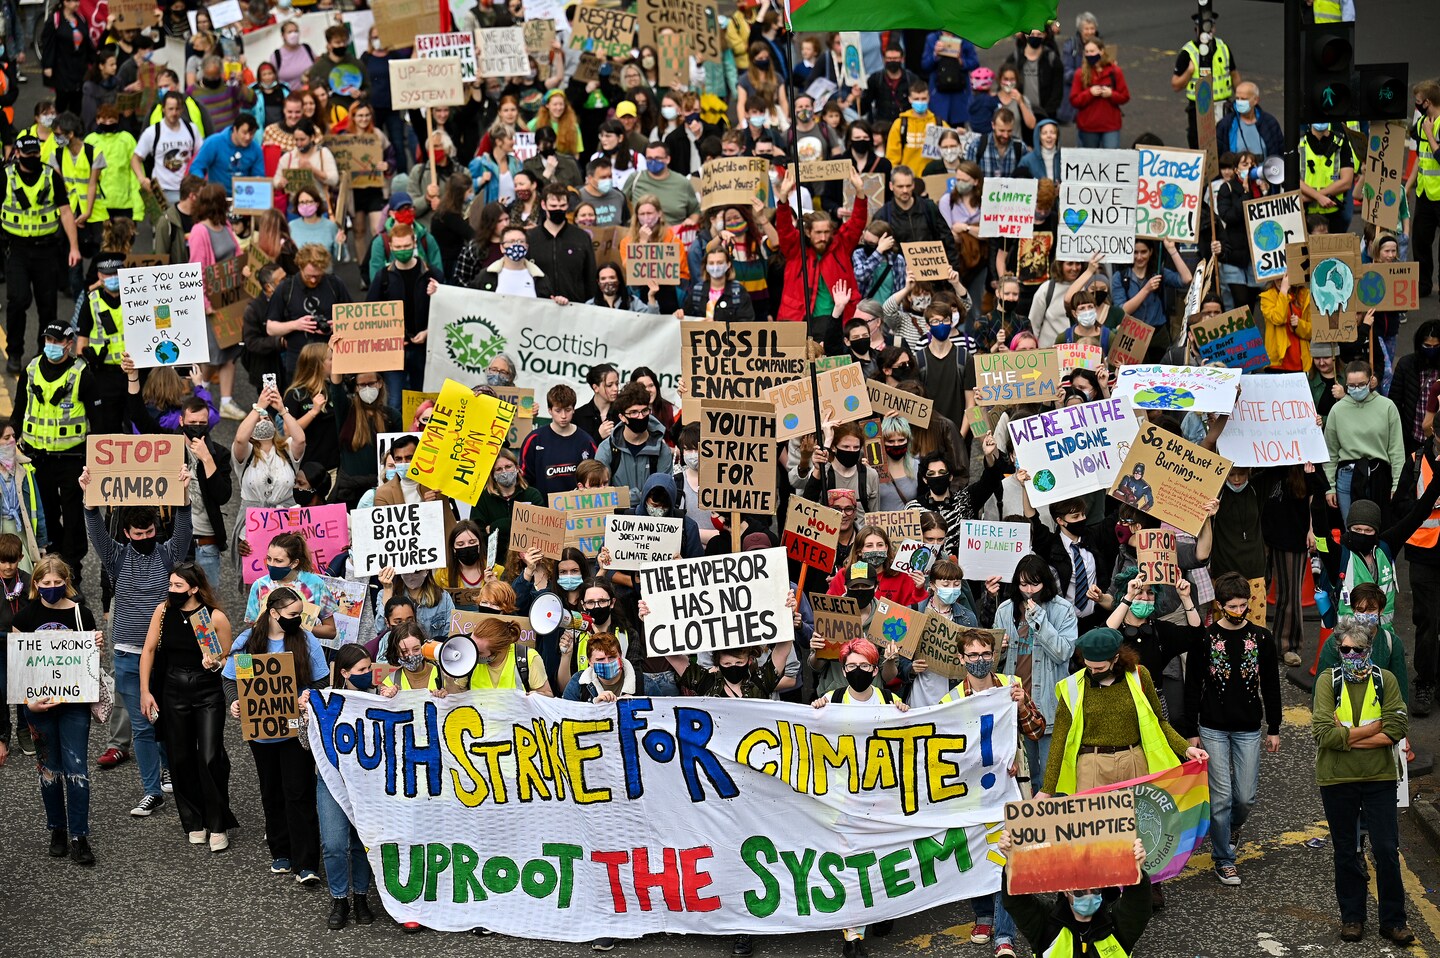 Young people around the world follow Greta Thunberg's call to rally over climate in first major protest since pandemic